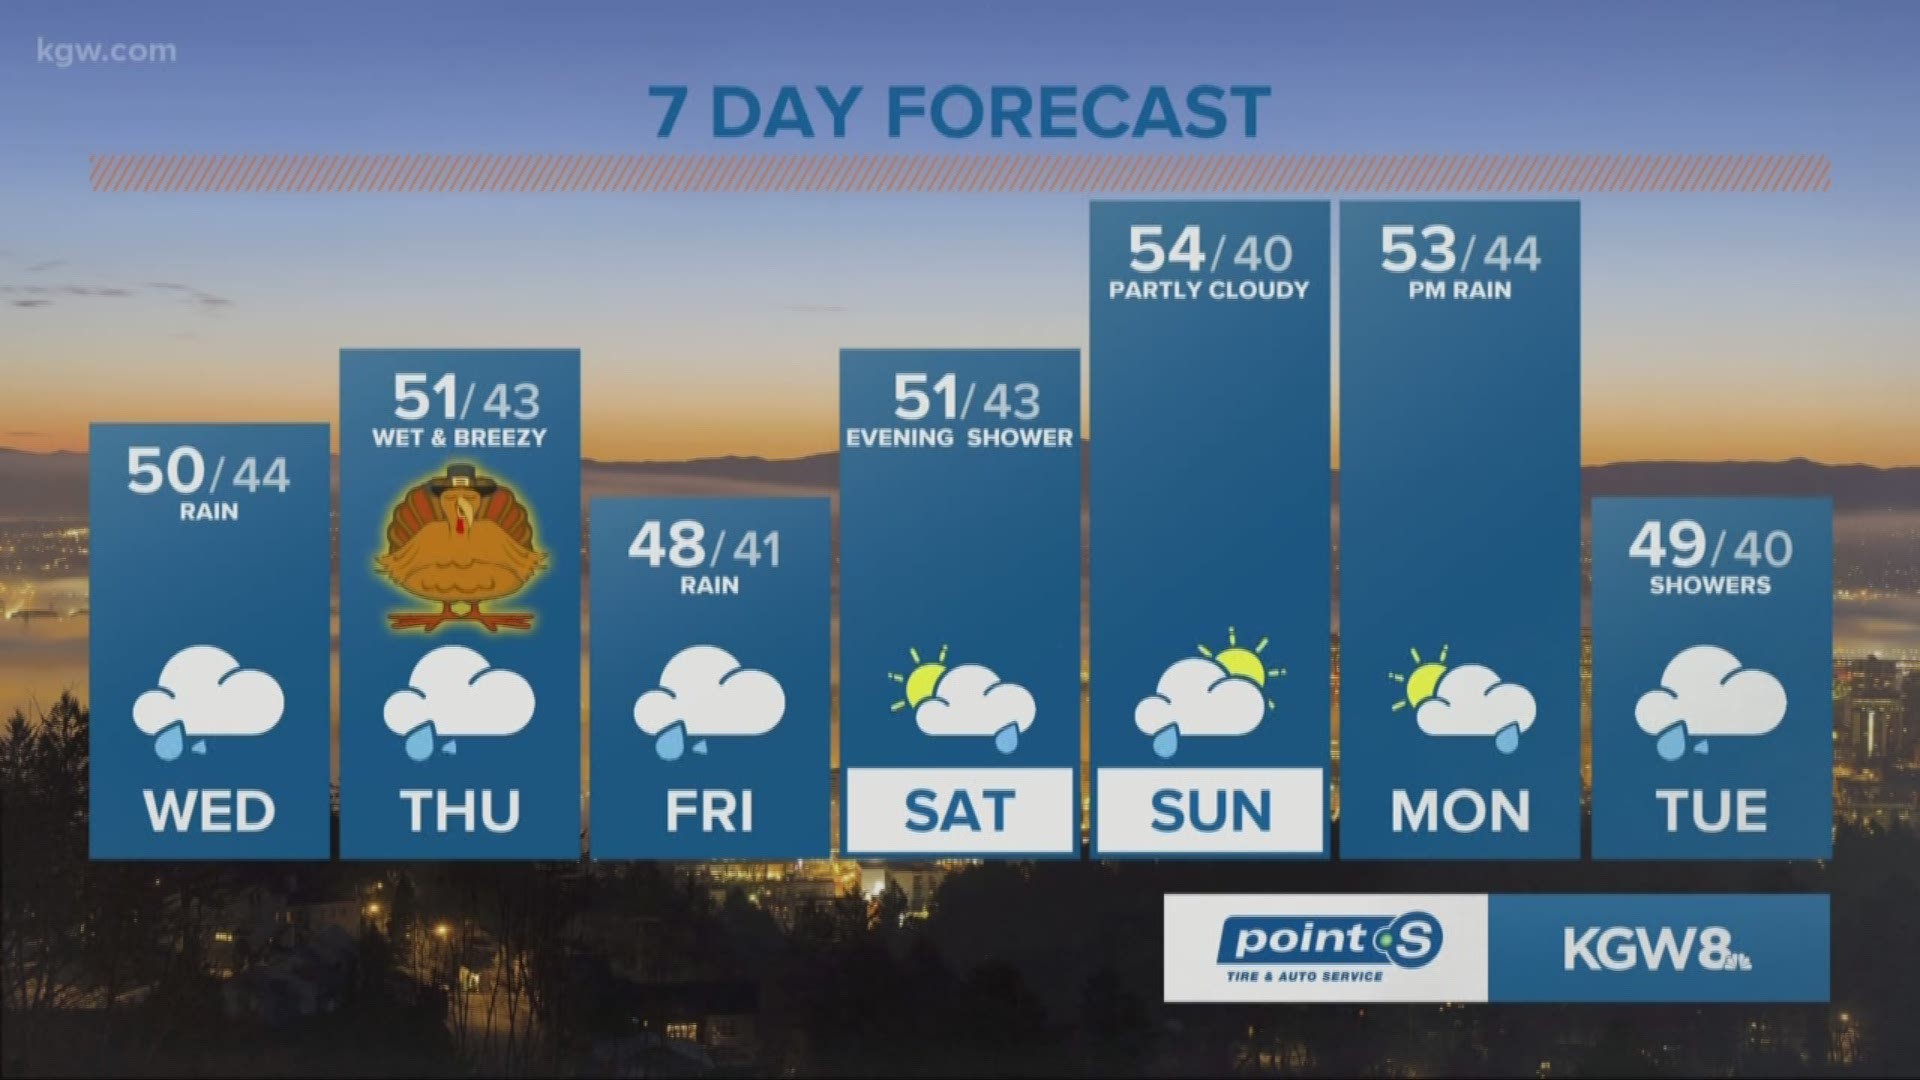 KGW Noon forecast 11-21-18